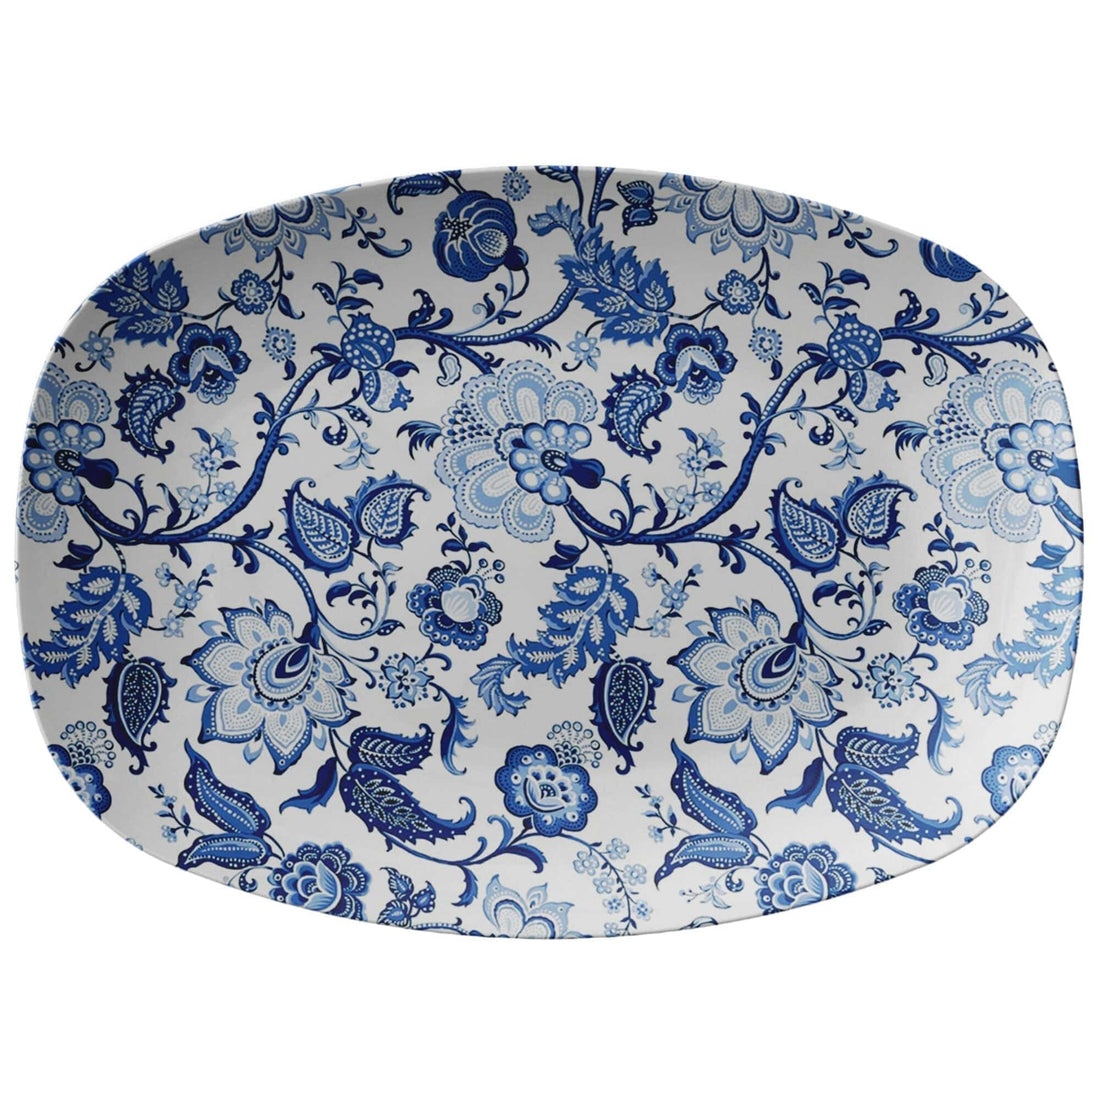 Kate McEnroe New York Serving Platter in Luxury Blue and White Floral ChinoiserieServing PlattersP21 - LUX - BLU - 24